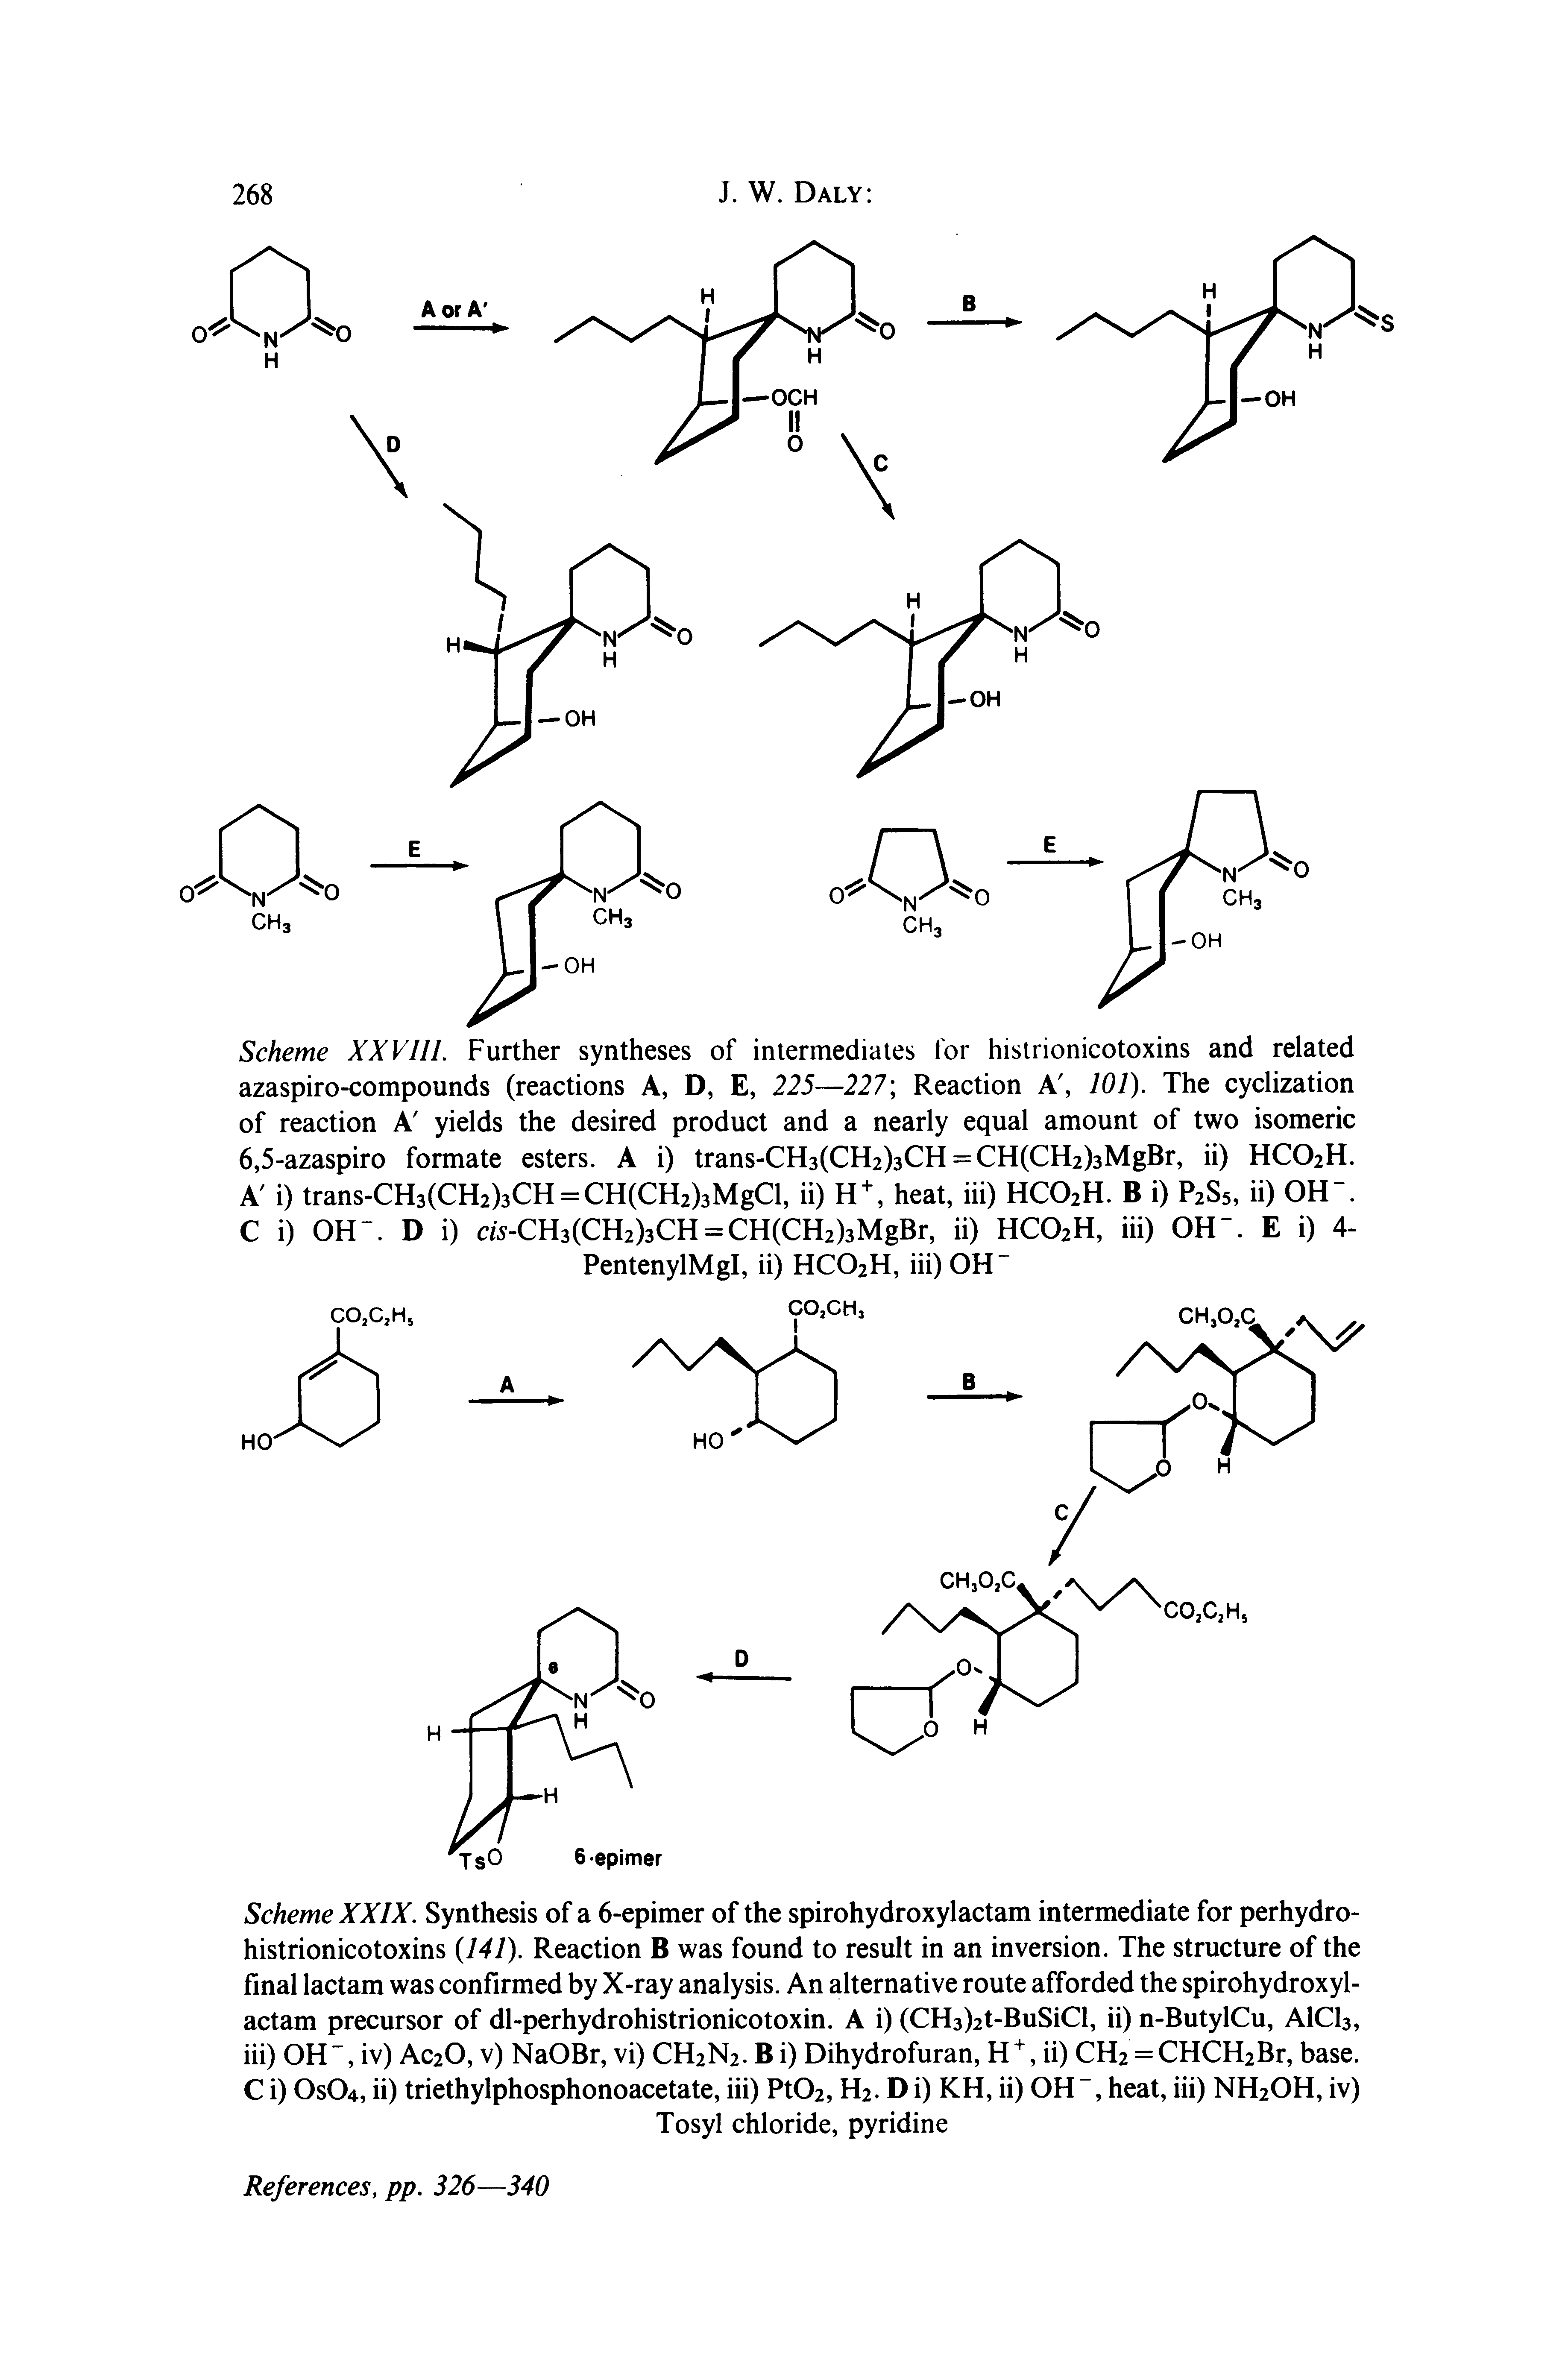 Scheme XXIX. Synthesis of a 6-epimer of the spirohydroxylactam intermediate for perhydro-histrionicotoxins I4I). Reaction B was found to result in an inversion. The structure of the final lactam was confirmed by X-ray analysis. An alternative route afforded the spirohydroxylactam precursor of dl-perhydrohistrionicotoxin. A i) (CH3)2t-BuSiCl, ii) n-ButylCu, AICI3, hi) OH", iv) AC2O, V) NaOBr, vi) CH2N2. B i) Dihydrofuran, ii) CH2 = CHCH2Br, base. C i) OSO4, ii) triethylphosphonoacetate, hi) Pt02, H2. Di) KH, ii) OH", heat, hi) NH2OH, iv)...